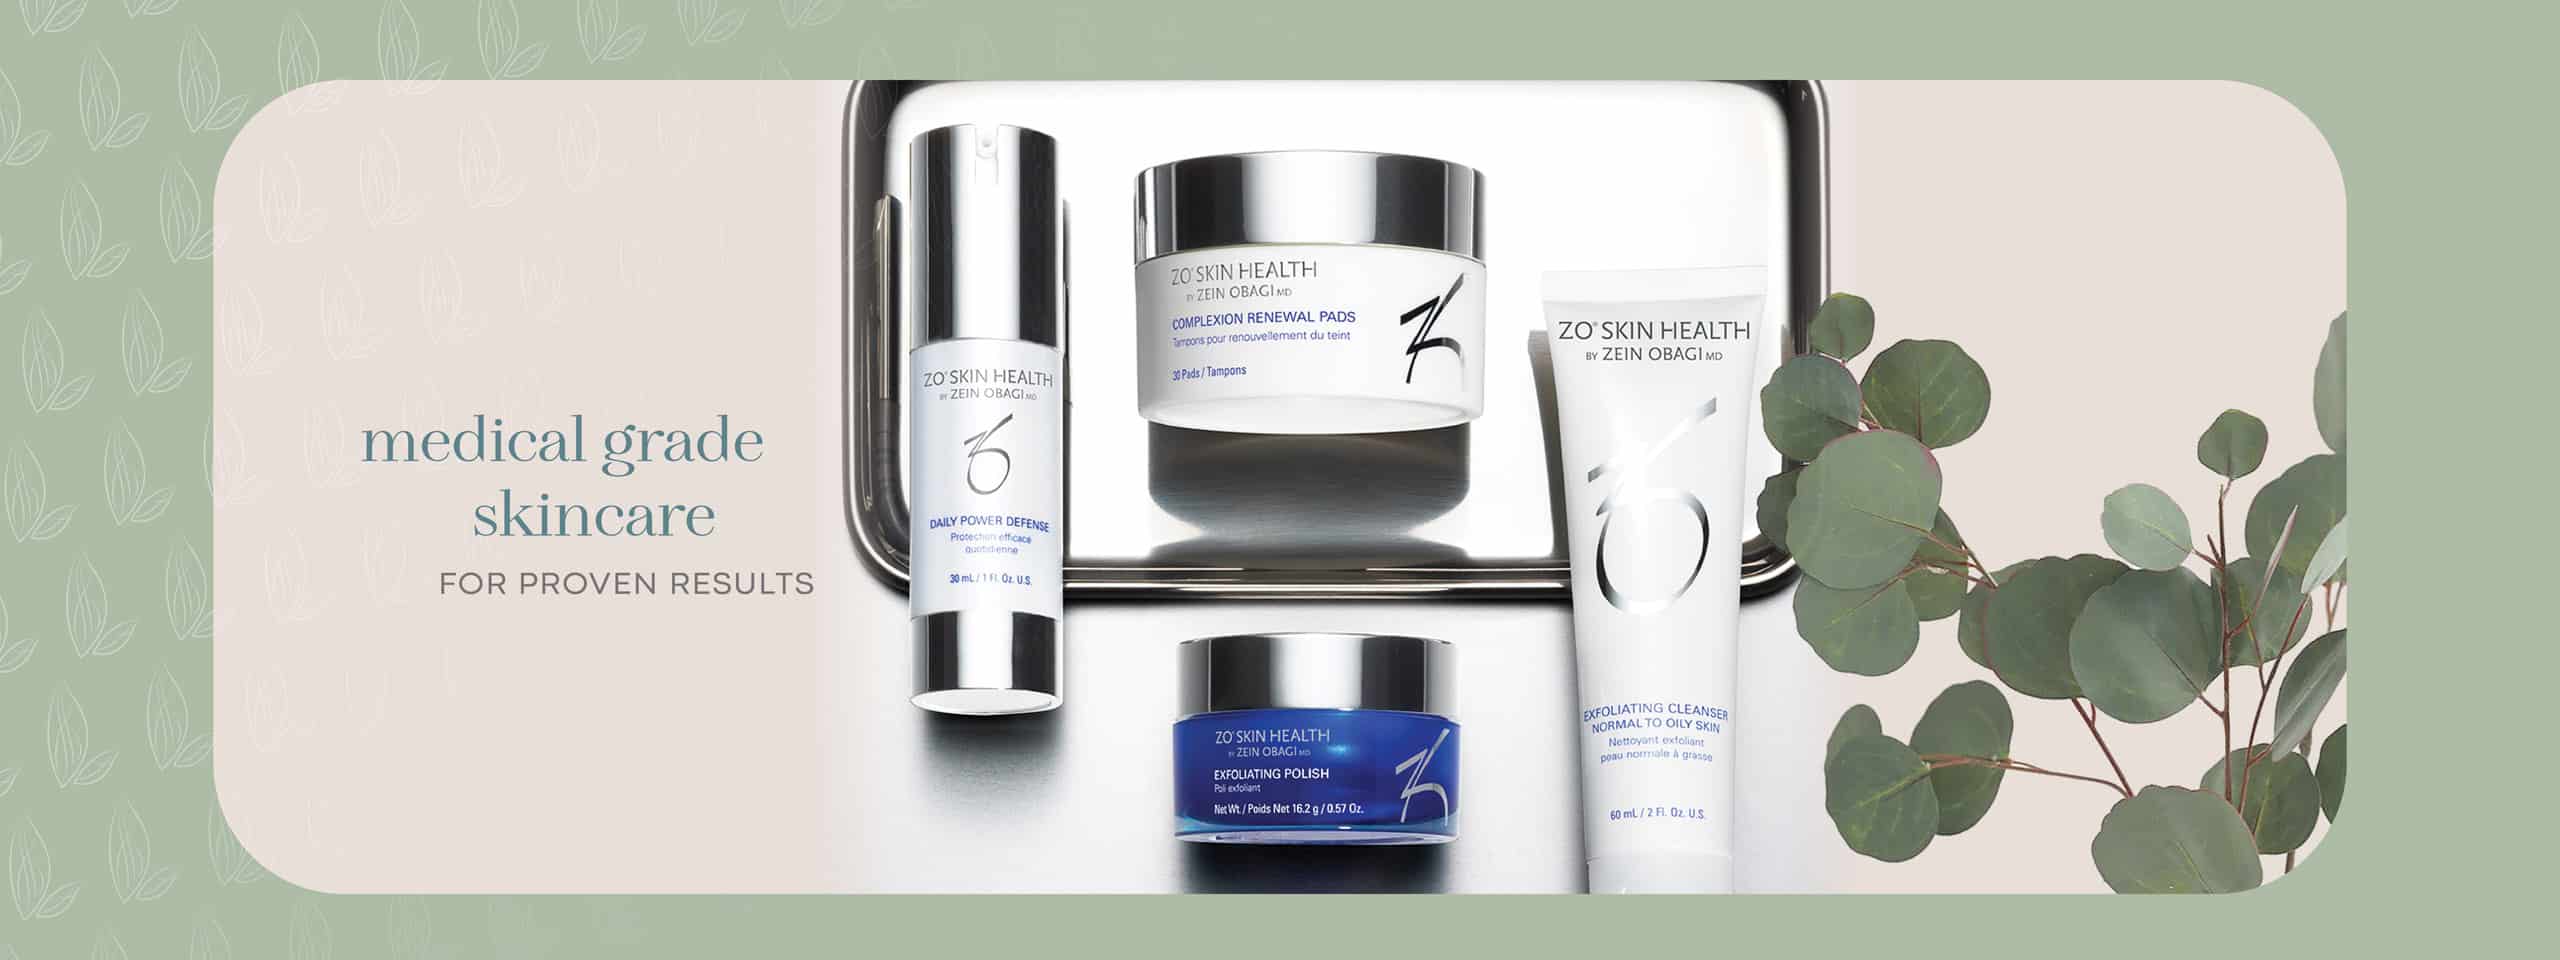 Medical Grade Skincare Products from FBT Faith in Beauty Medical Aesthetics in Medway MA